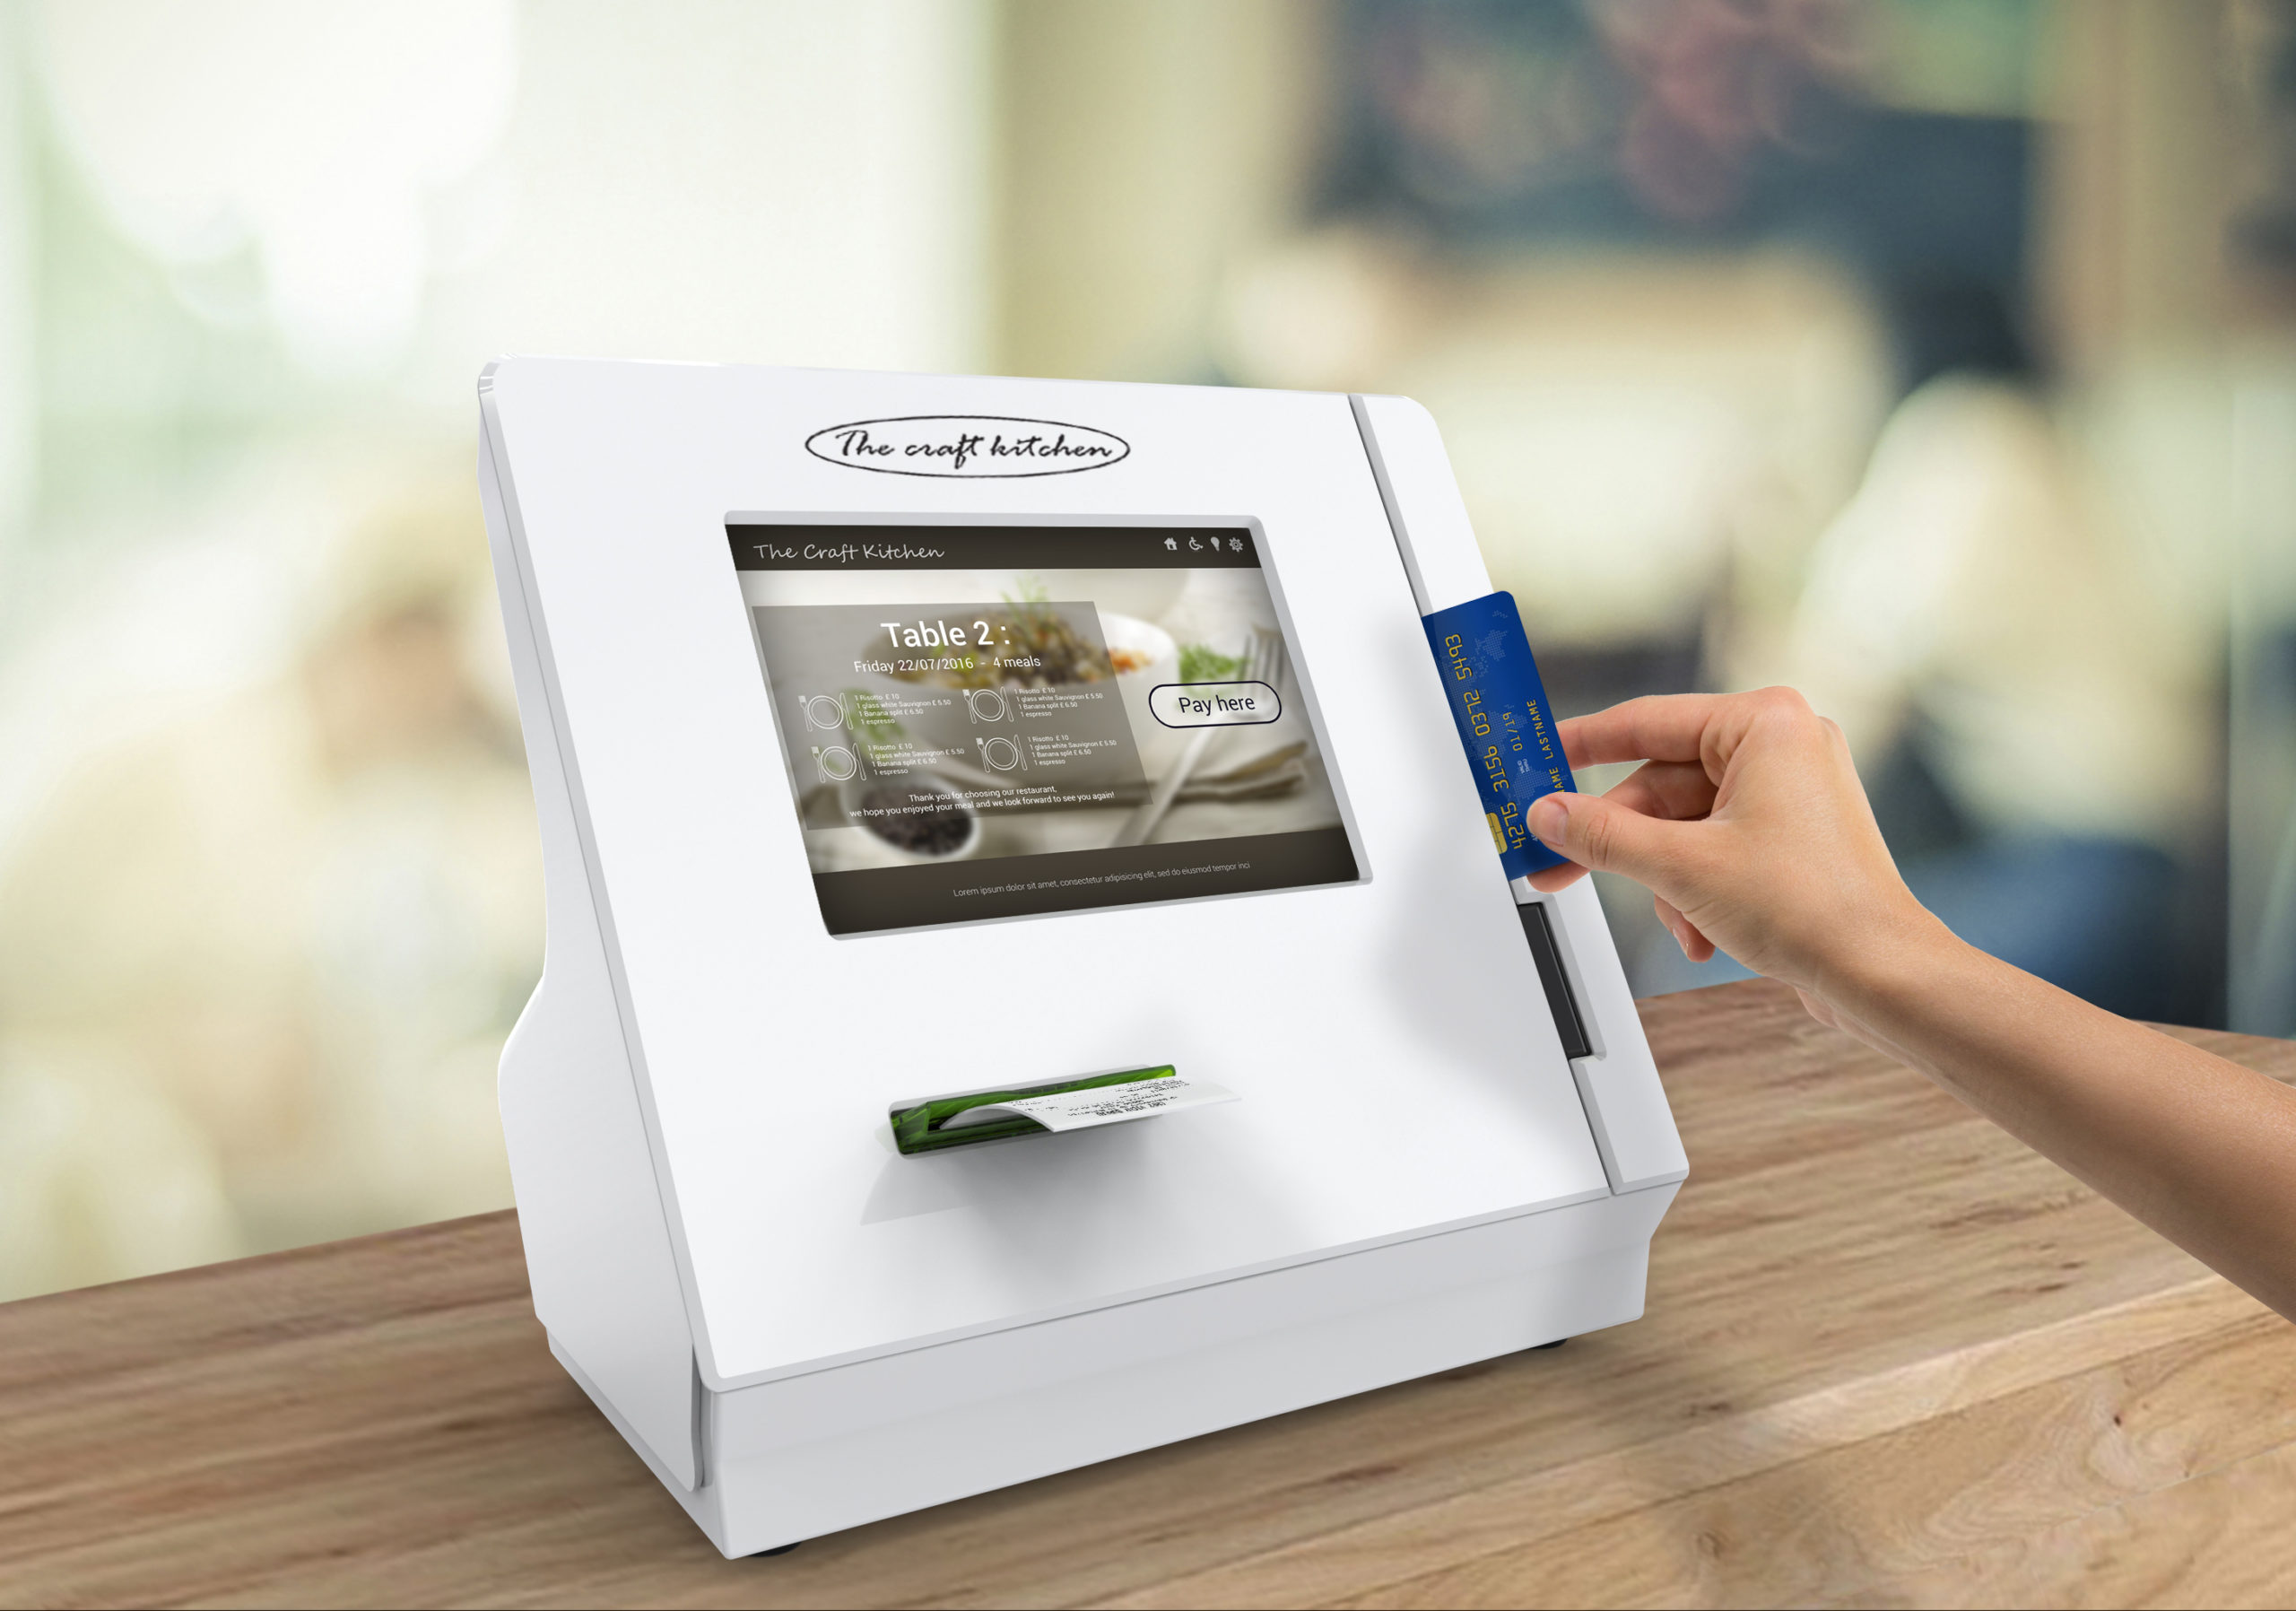 Integrator Pro 10 for Restaurants and mPOS Terminals